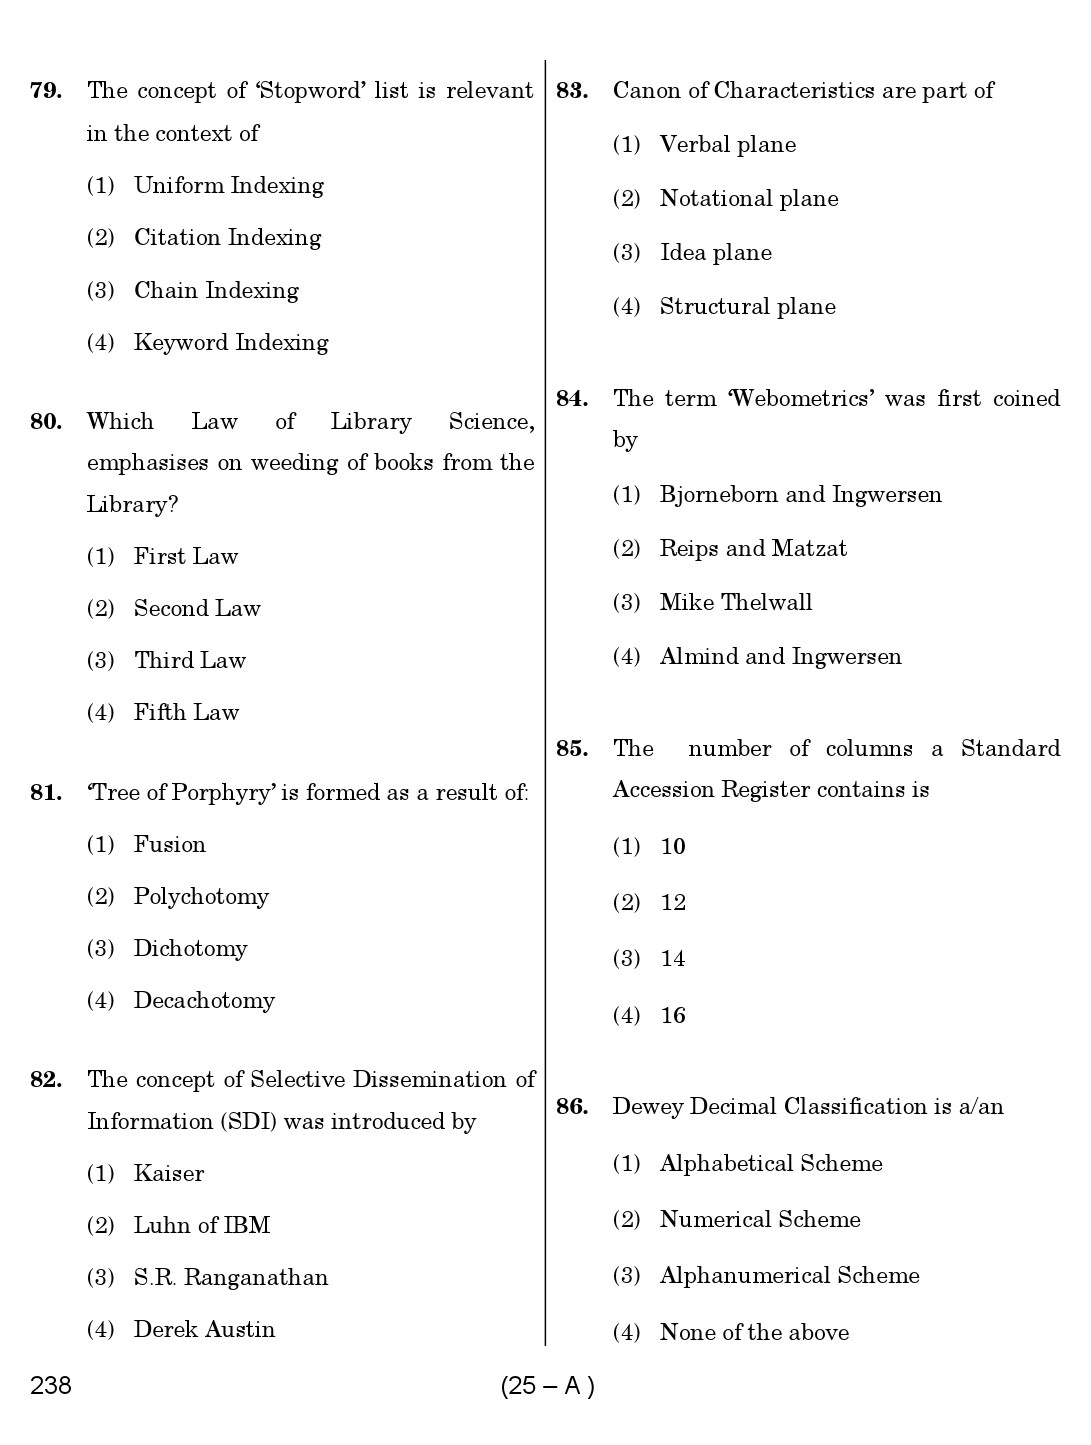 Karnataka PSC 238 Specific Paper II Librarian Exam Sample Question Paper 25